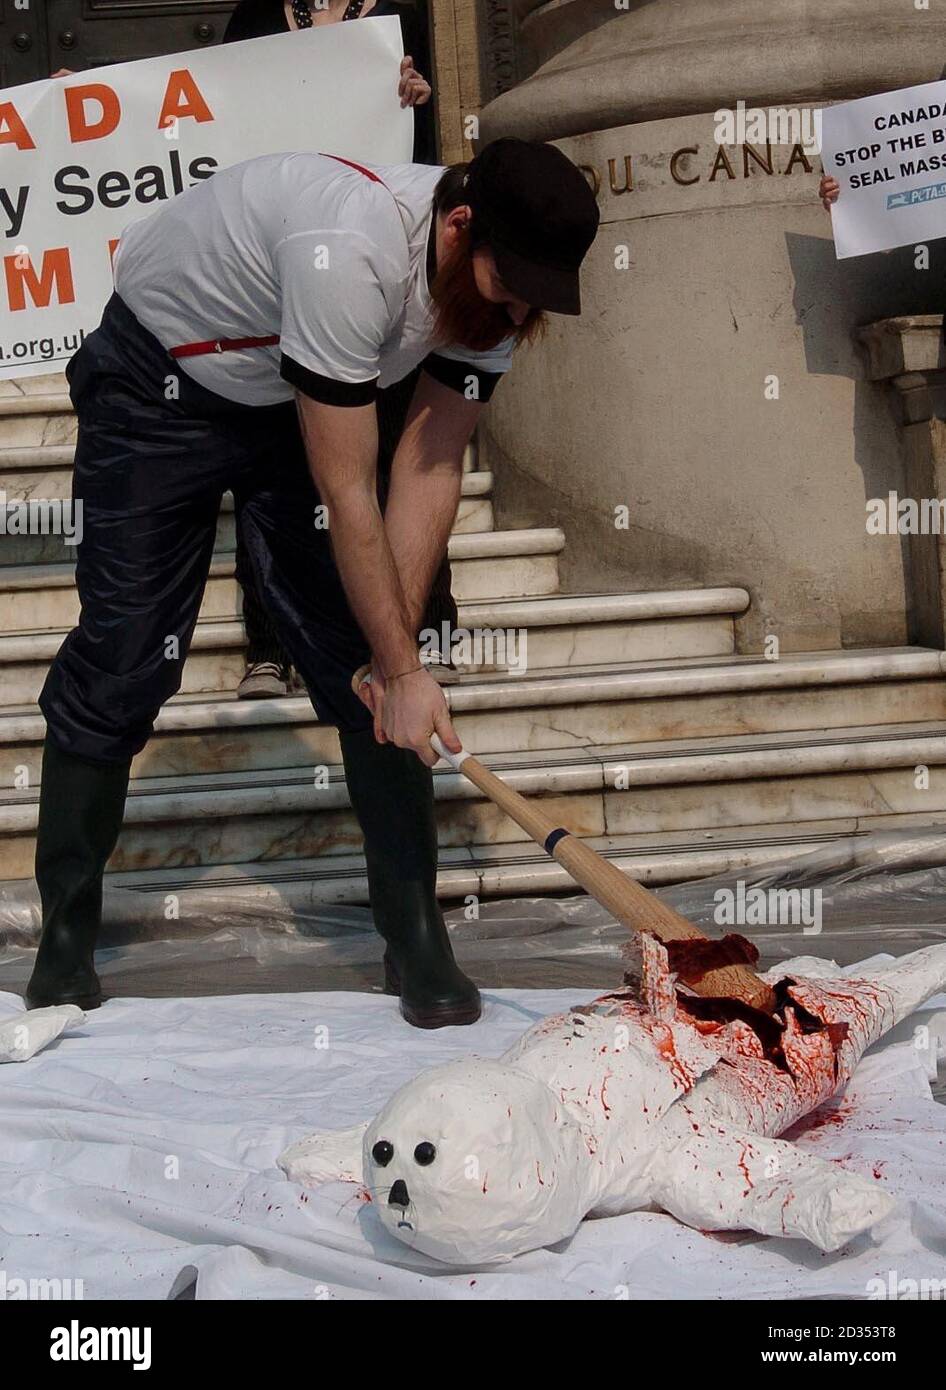 Members of the animal welfare group PETA stage a protest outside the Canadian embassy in London, before the start of the annual seal hunt in Newfoundland. Stock Photo